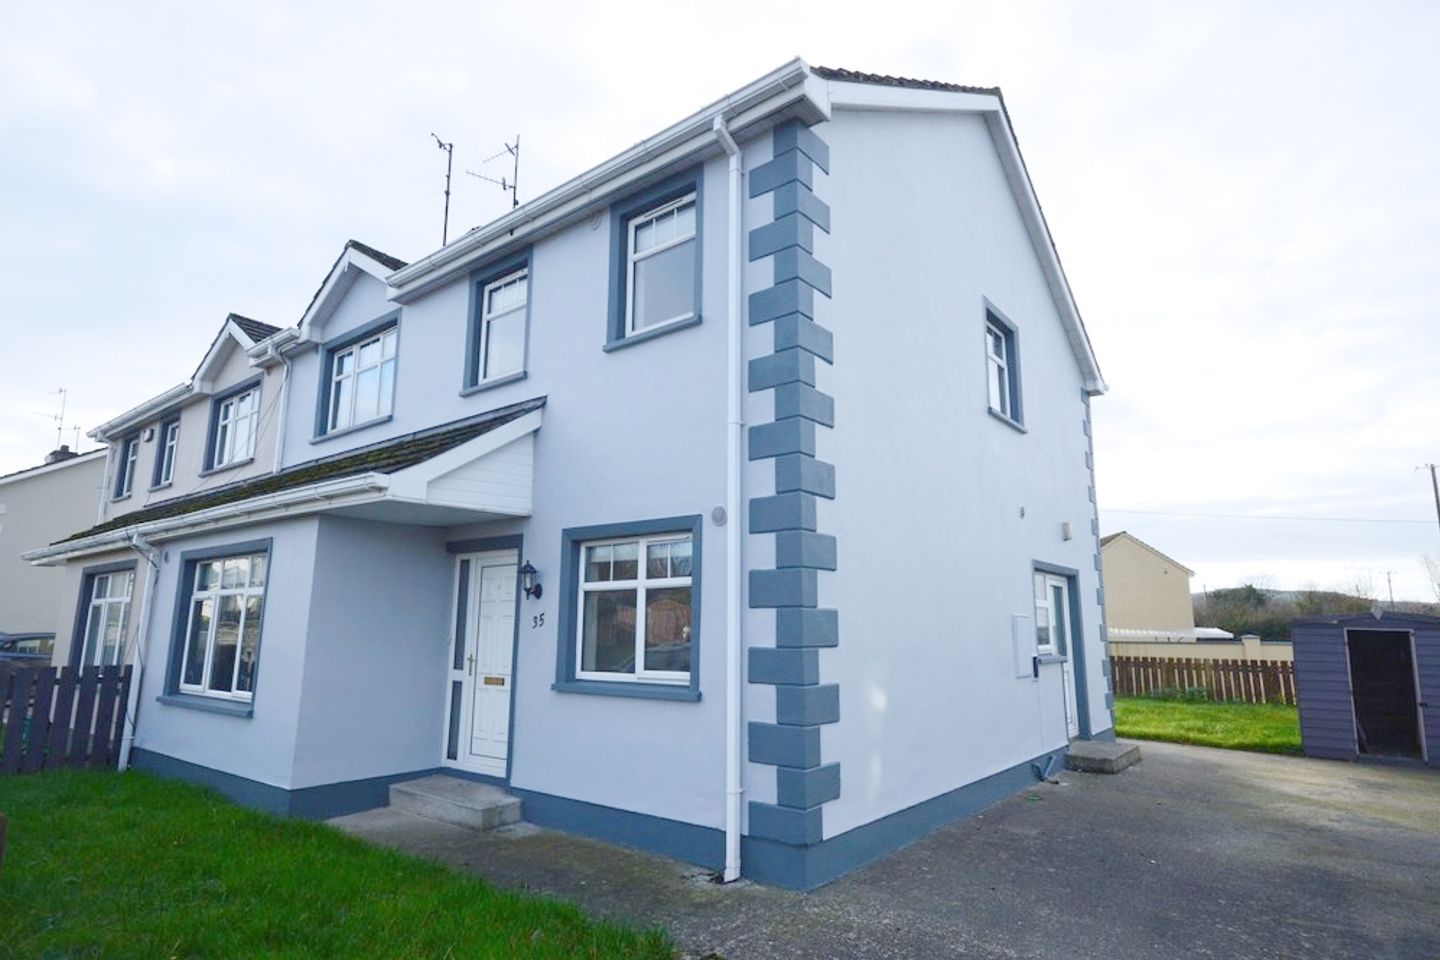 35 Beechwood Grove, Convoy, Co. Donegal